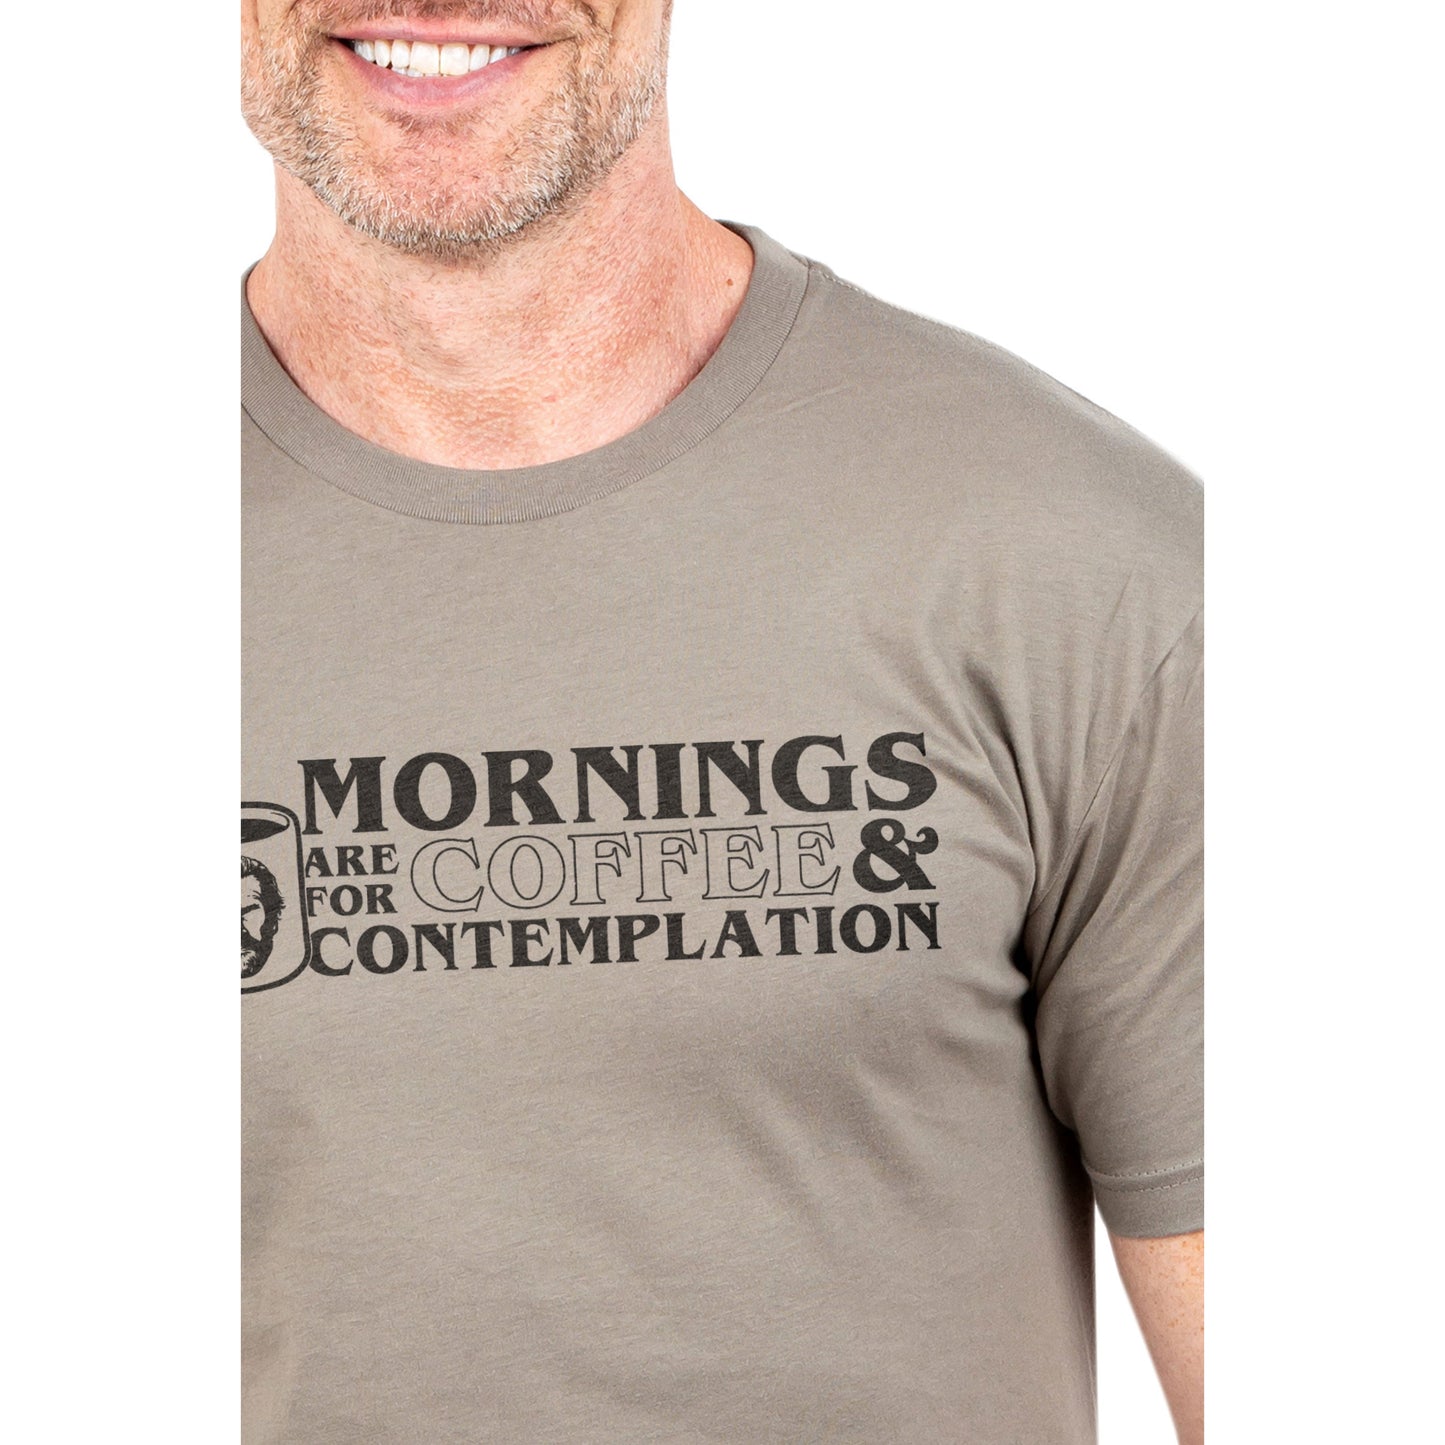 Mornings Are For Coffee And Contemplation Printed Graphic Men's Crew T-Shirt Heather Tan Closeup Image